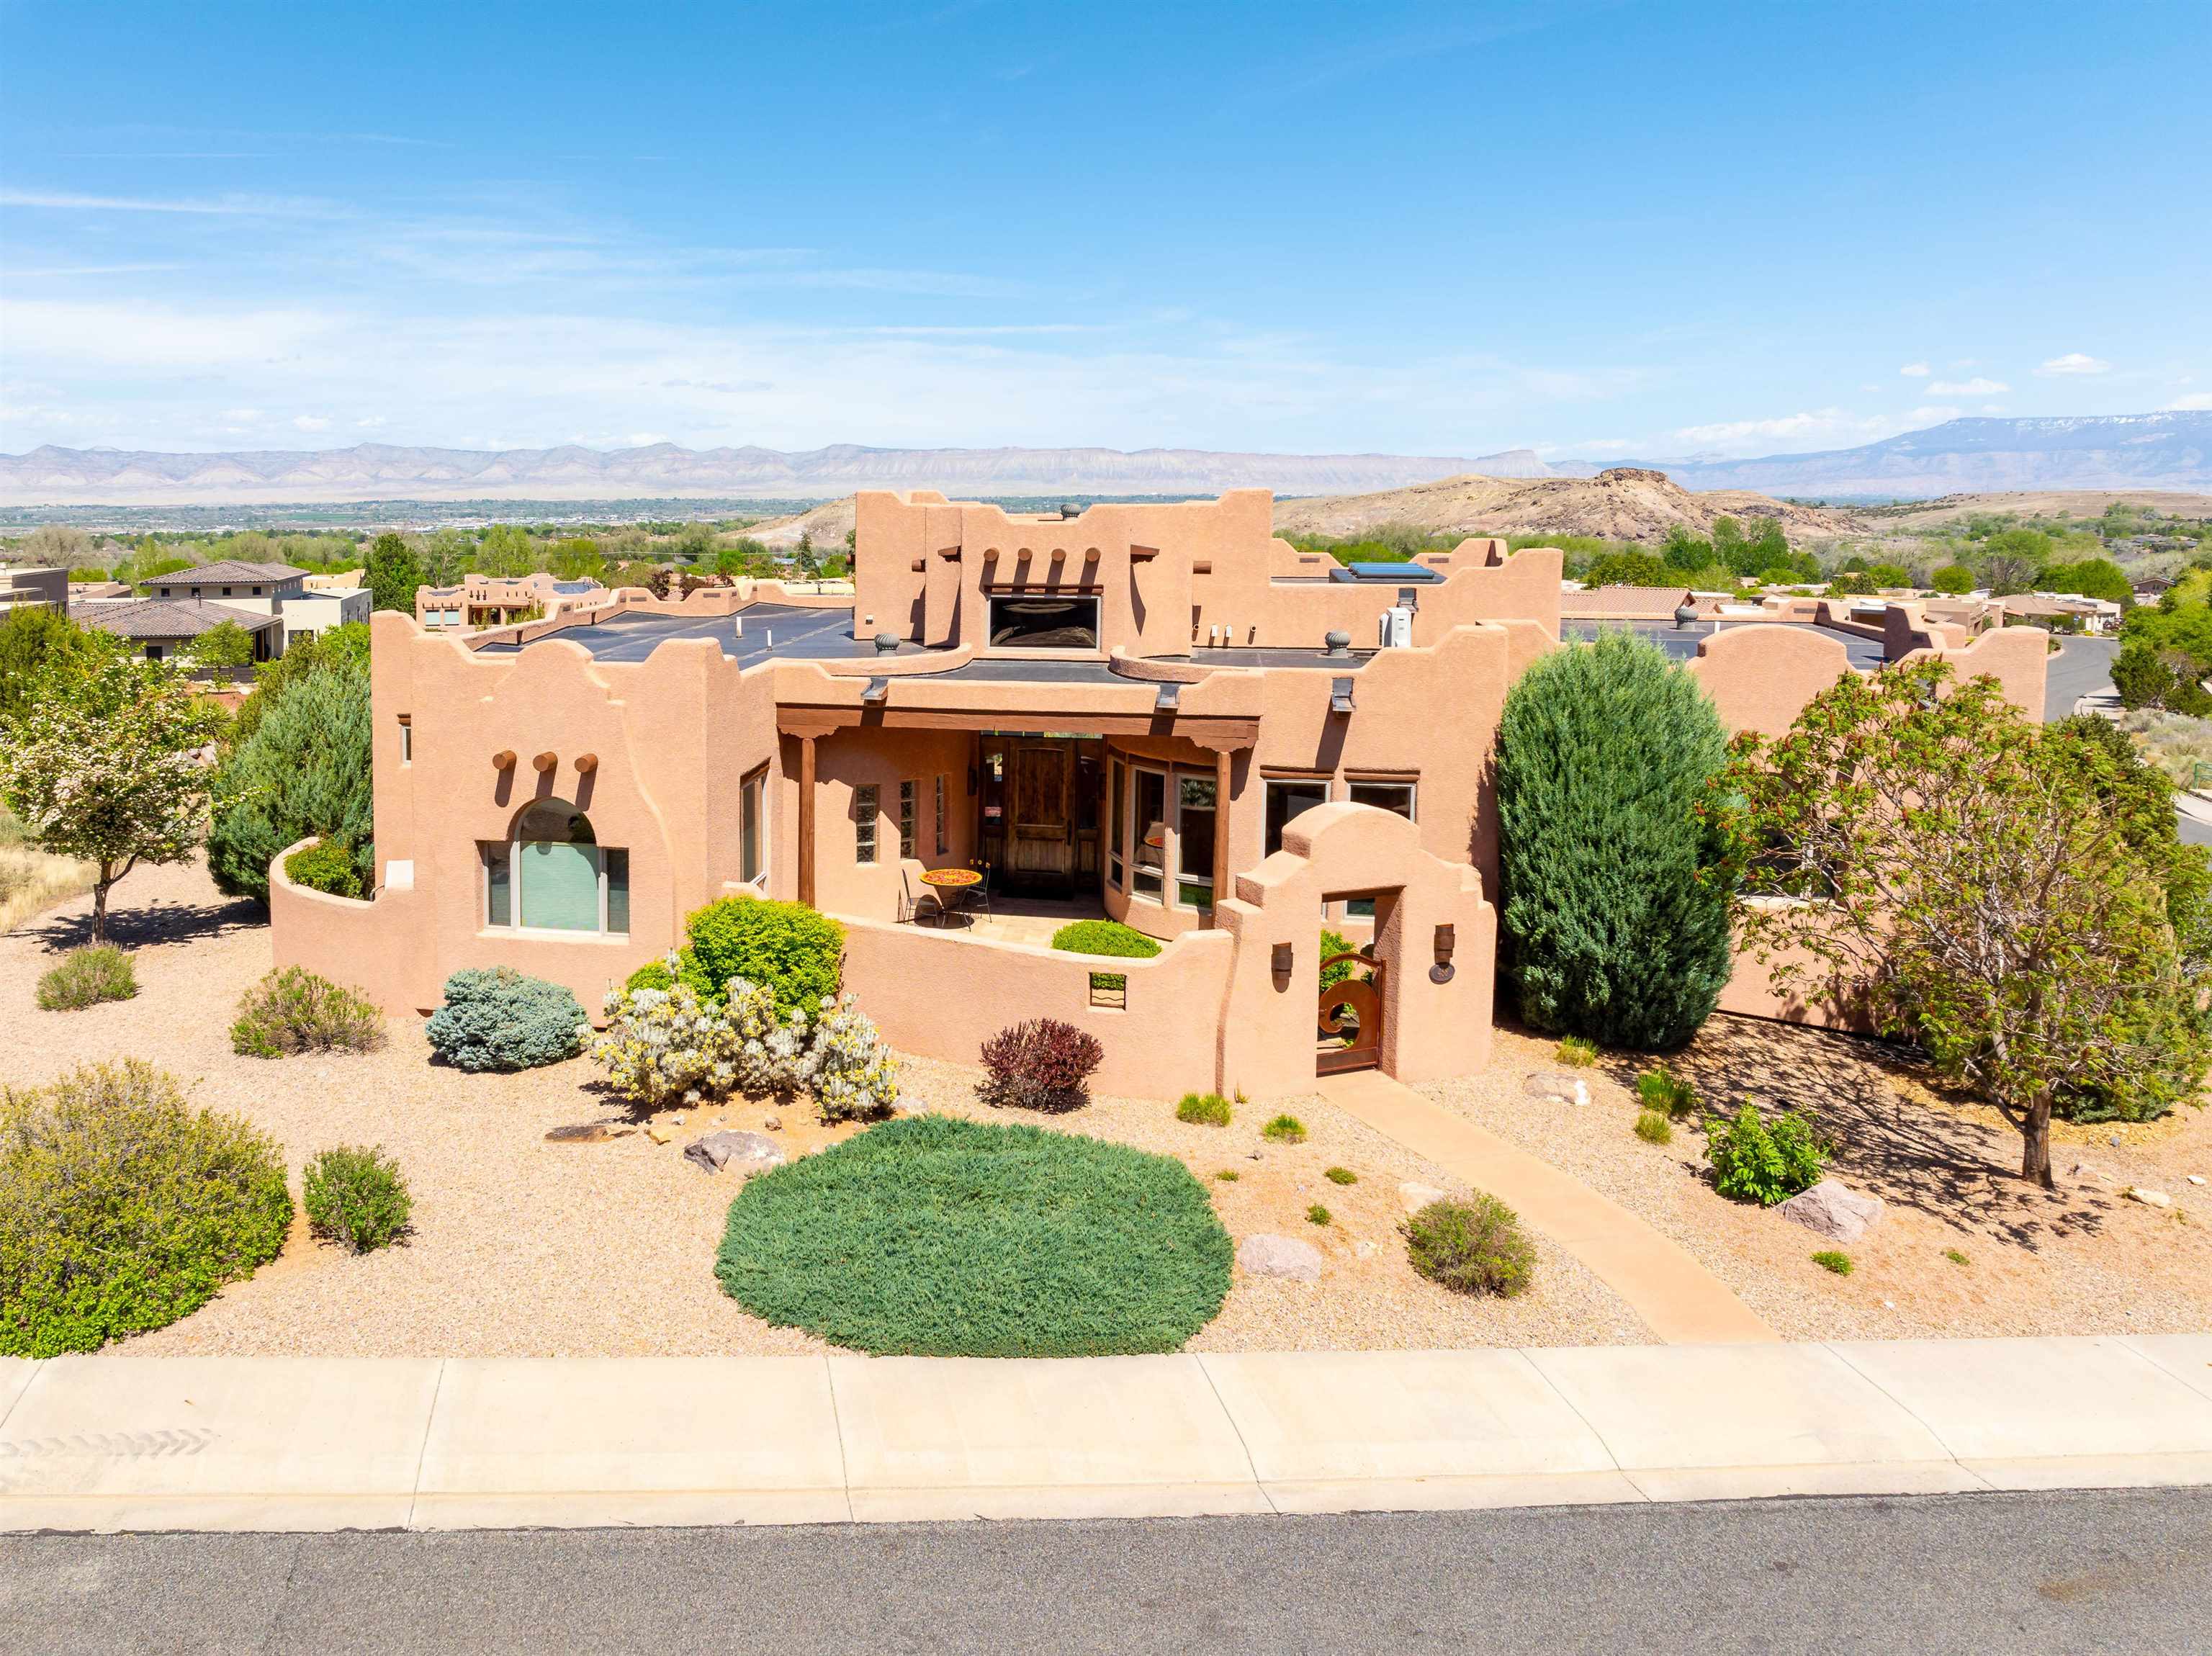 The minute you step in to this truly unique high-desert oasis you'll be wowed by gorgeous views out of every window and stunning detail throughout.  Built by Maves Construction, this Parade of Homes beauty has been carefully throughout, designed and maintained by the original owner/designer.  Featuring two kiva fireplaces, soaring ceilings with vigas and custom, 8 ft knotty alder doors and cabinetry, all bedrooms have an ensuite bath and ample closet space. The gourmet kitchen will please the most discerning of cooks. Wine connoisseurs will appreciate the wine room adjacent to the formal dining space, a great opportunity to take in the Monument view. Outside, you'll find multiple patios, an outdoor kitchen with granite countertops, a stunning water feature and multiple vantage points to take in the best of the Grand Valley landscapes. An elevator ride to the lower level leads to the bonus room, 1/2 bath, oversized 3 car garage and extra storage. This home has been carefully curated and maintained, furnishings are negotiable.  Book your private showing today!